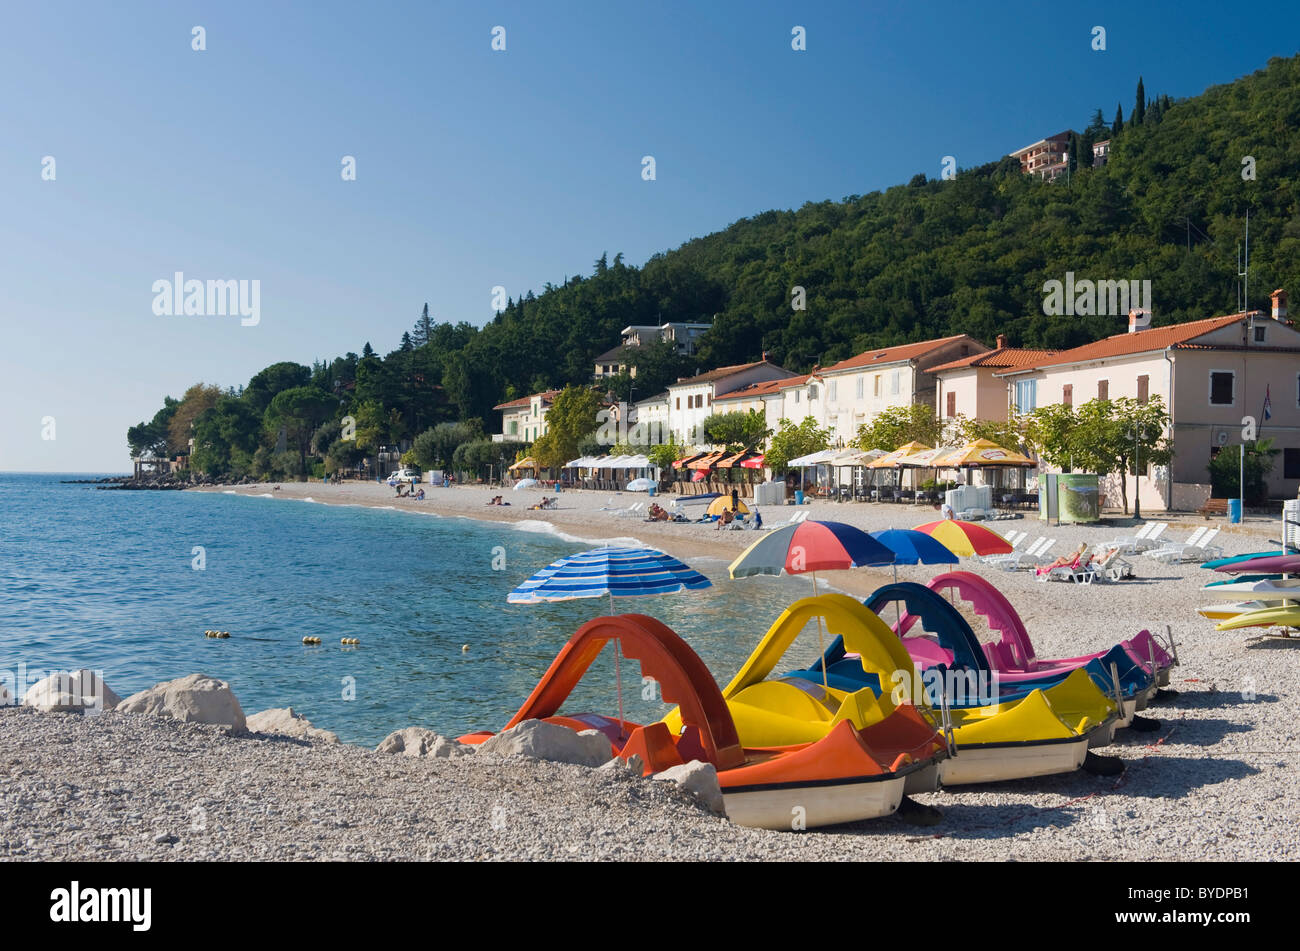 Plage de Moscenicka Draga, Istrie, Croatie, Europe Banque D'Images